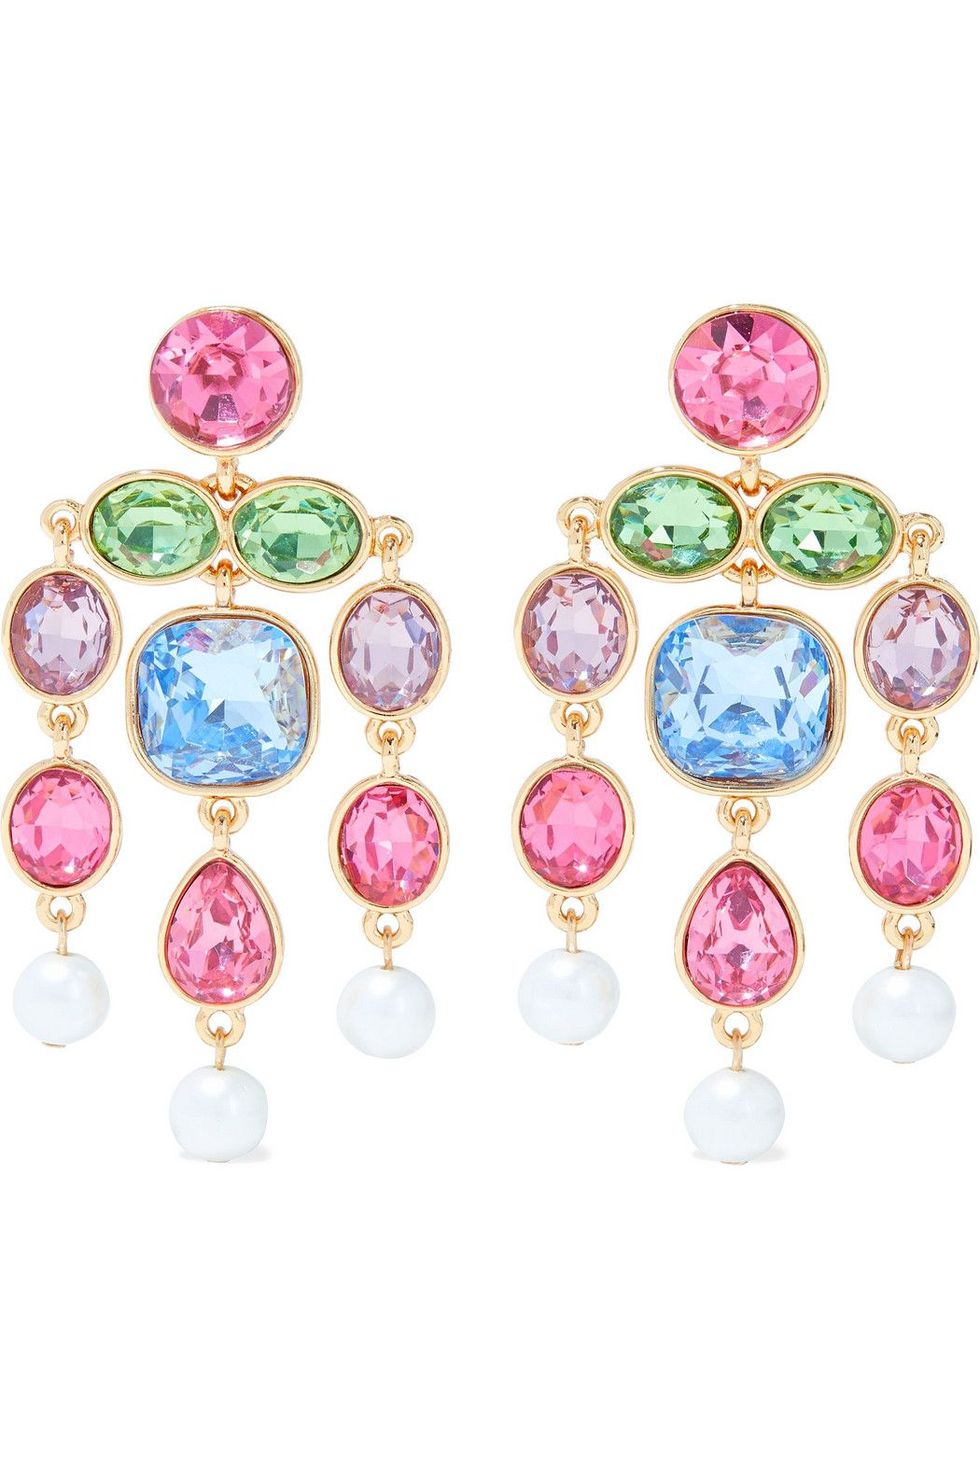 22-karat gold-plated, crystal and faux pearl earrings